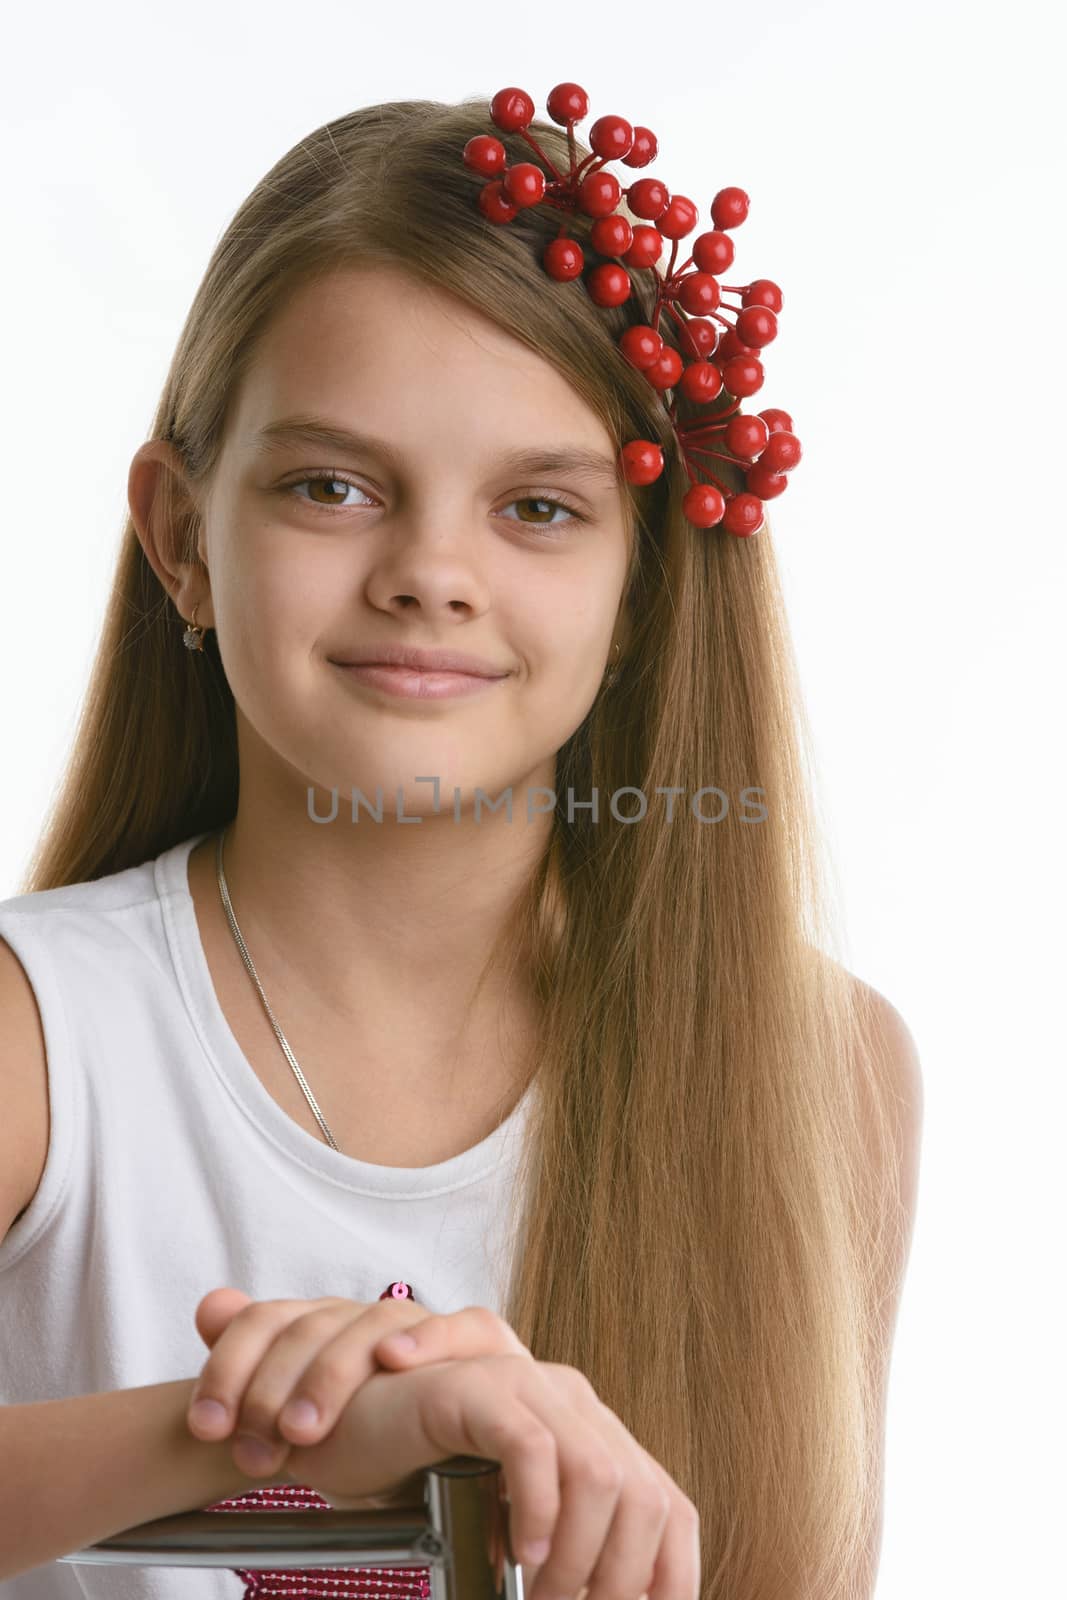 Portrait of a girl of Slavic appearance with a bunch of berries in her hair close-up